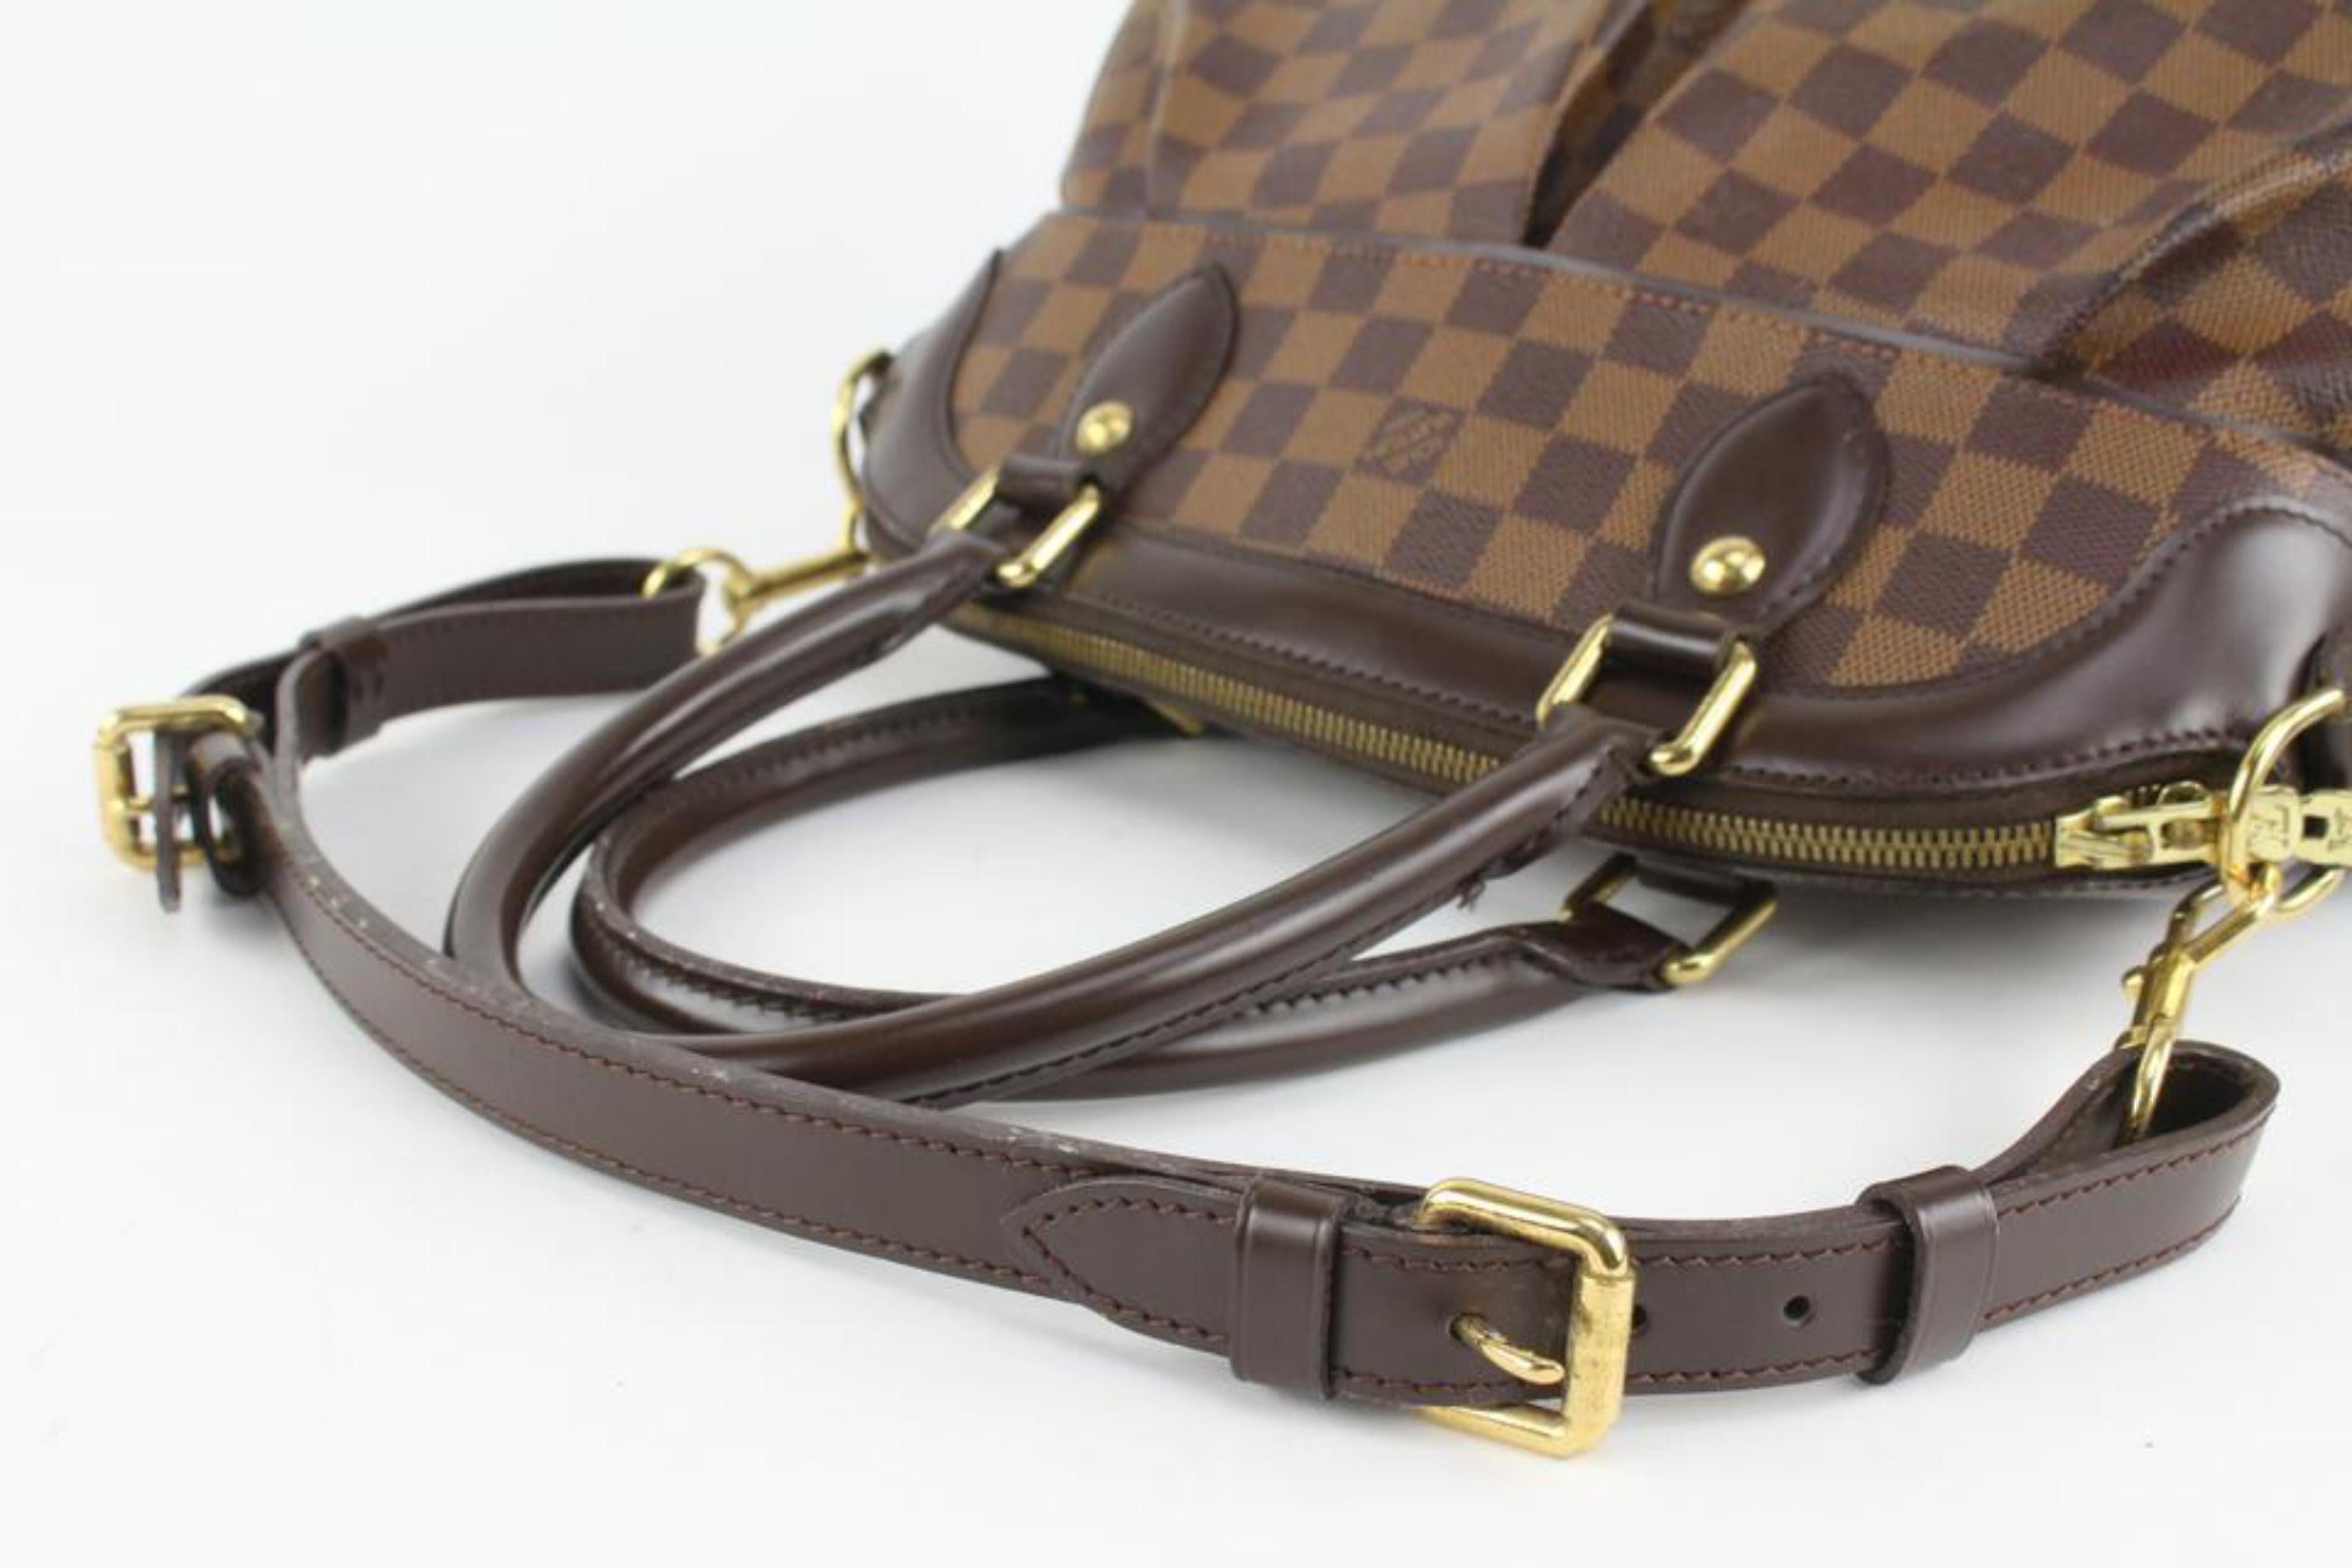 Louis Vuitton Damier Ebene Trevi PM Bowler with Strap 1210v35 In Good Condition For Sale In Dix hills, NY